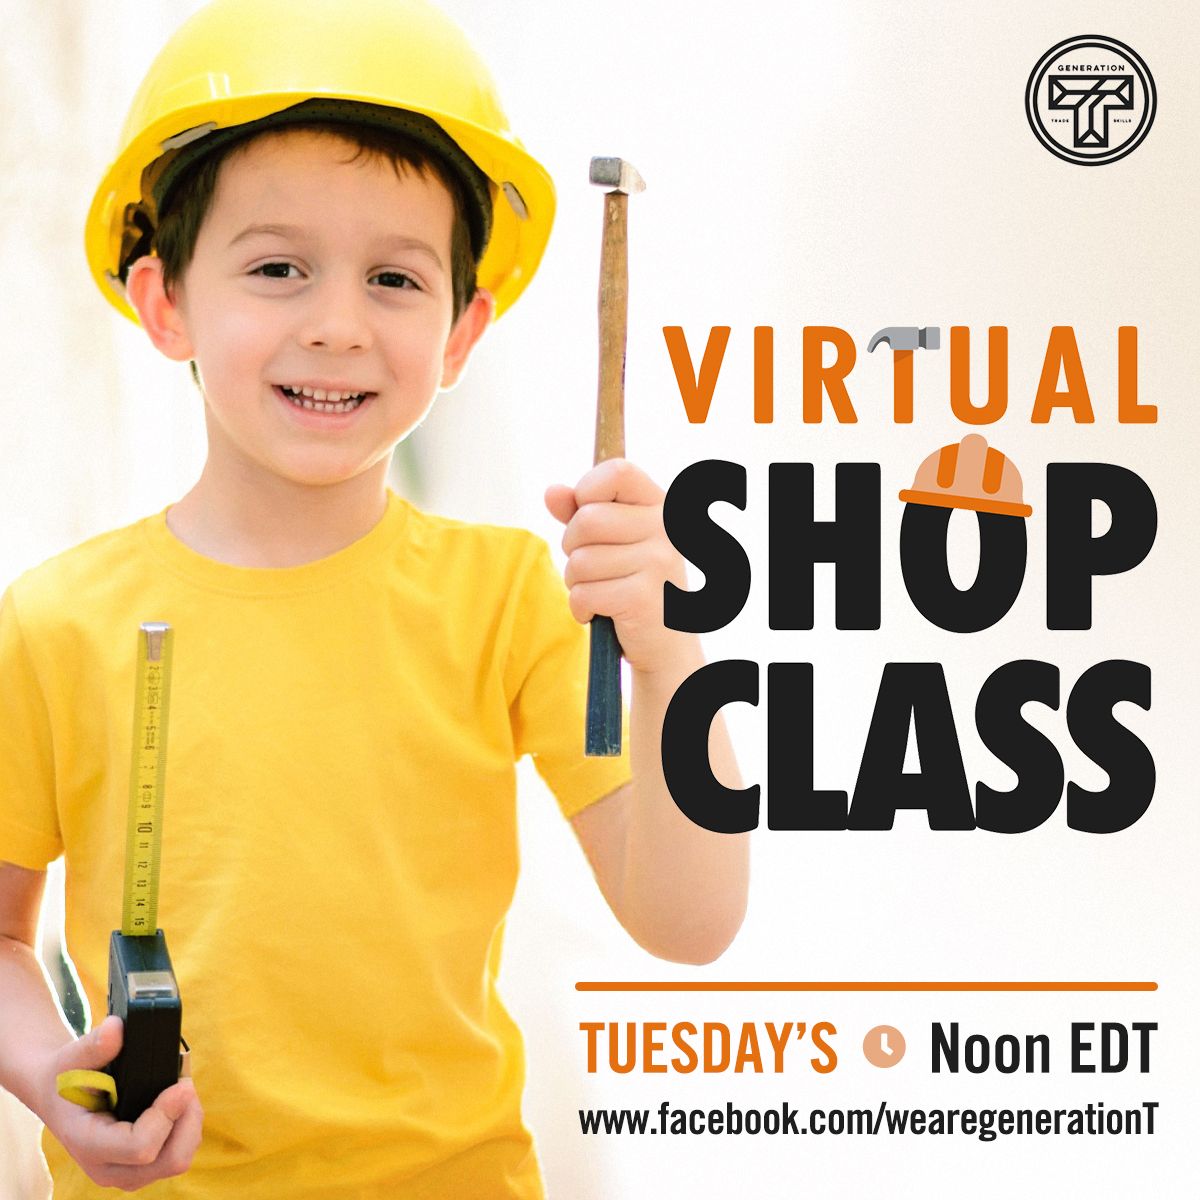 Hey Kids (and parents too!) We're excited to present our first installment of Virtual Shop Class this coming Tuesday, Noon EDT, on Facebook Live! Get the details by clicking here: bit.ly/VirtualShopCla…